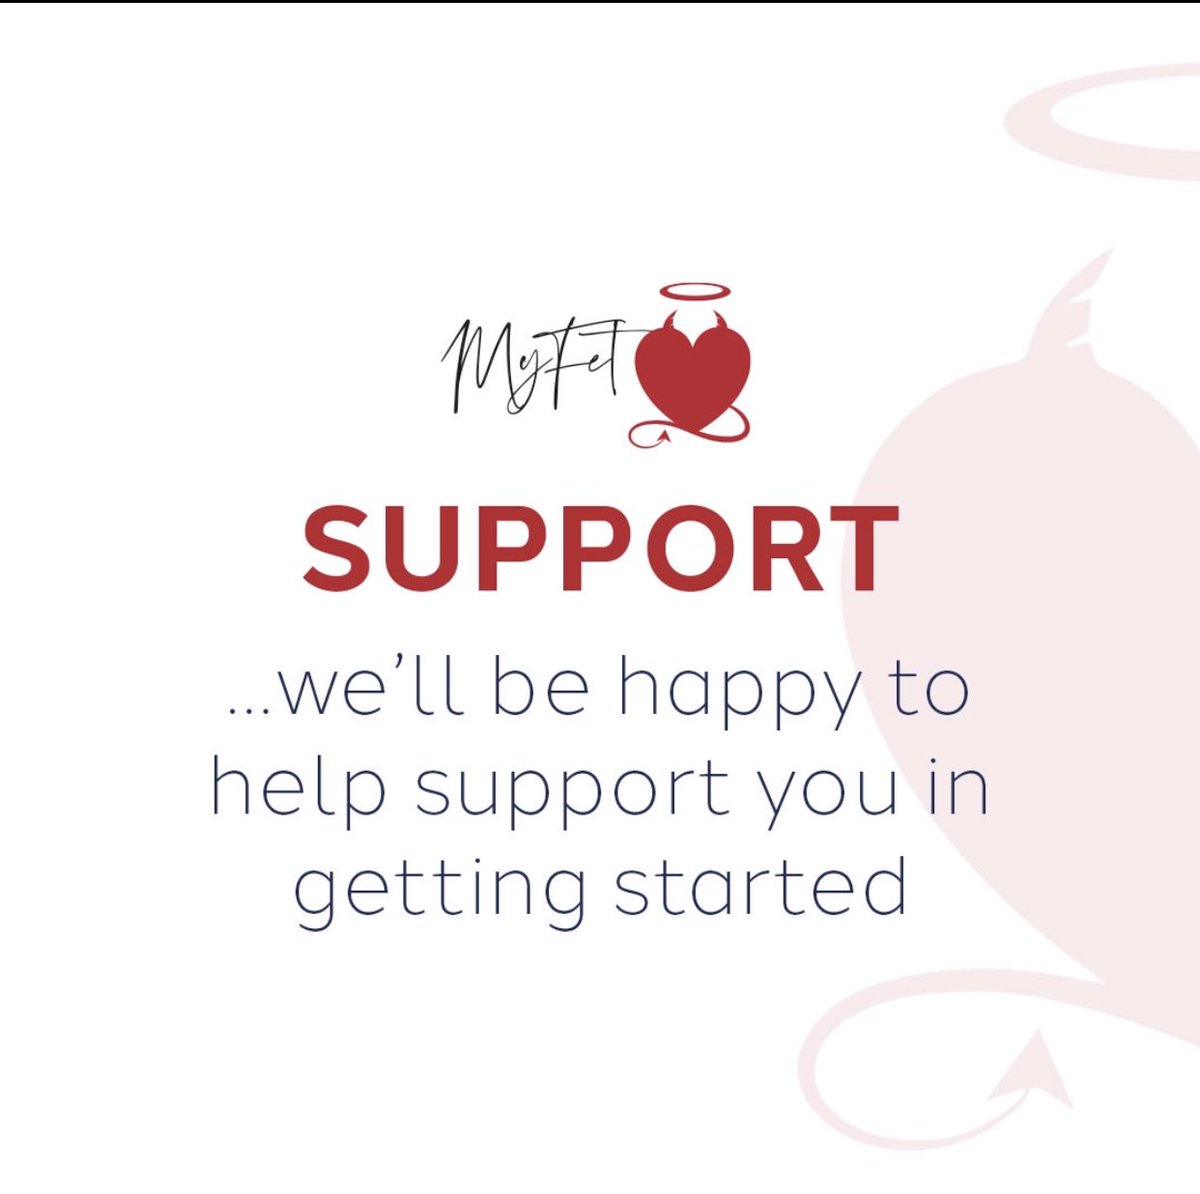 Looking for a new platform? MyFet.com are ❤️ welcoming ❤️ supportive ❤️ fetish friendly With 90% take home we are also the LEADING platform within the industry with SW’ers at the ❤️ of all we do! Check is out today!